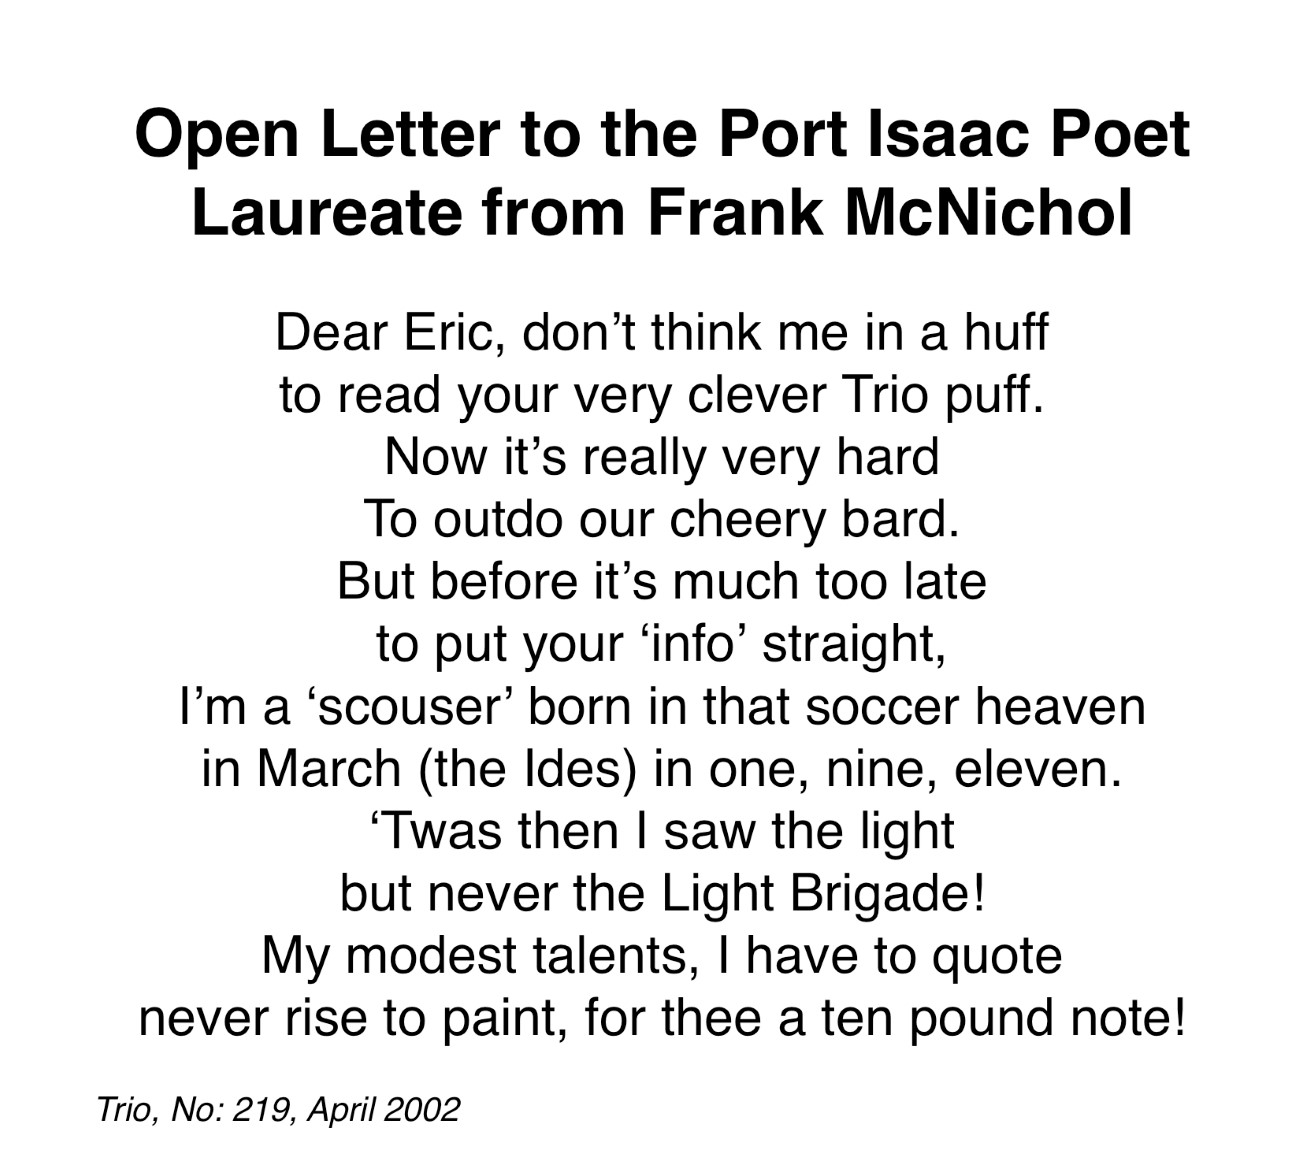 An Open Letter to the Port Isaac Poet Laureate from Frank McNichol